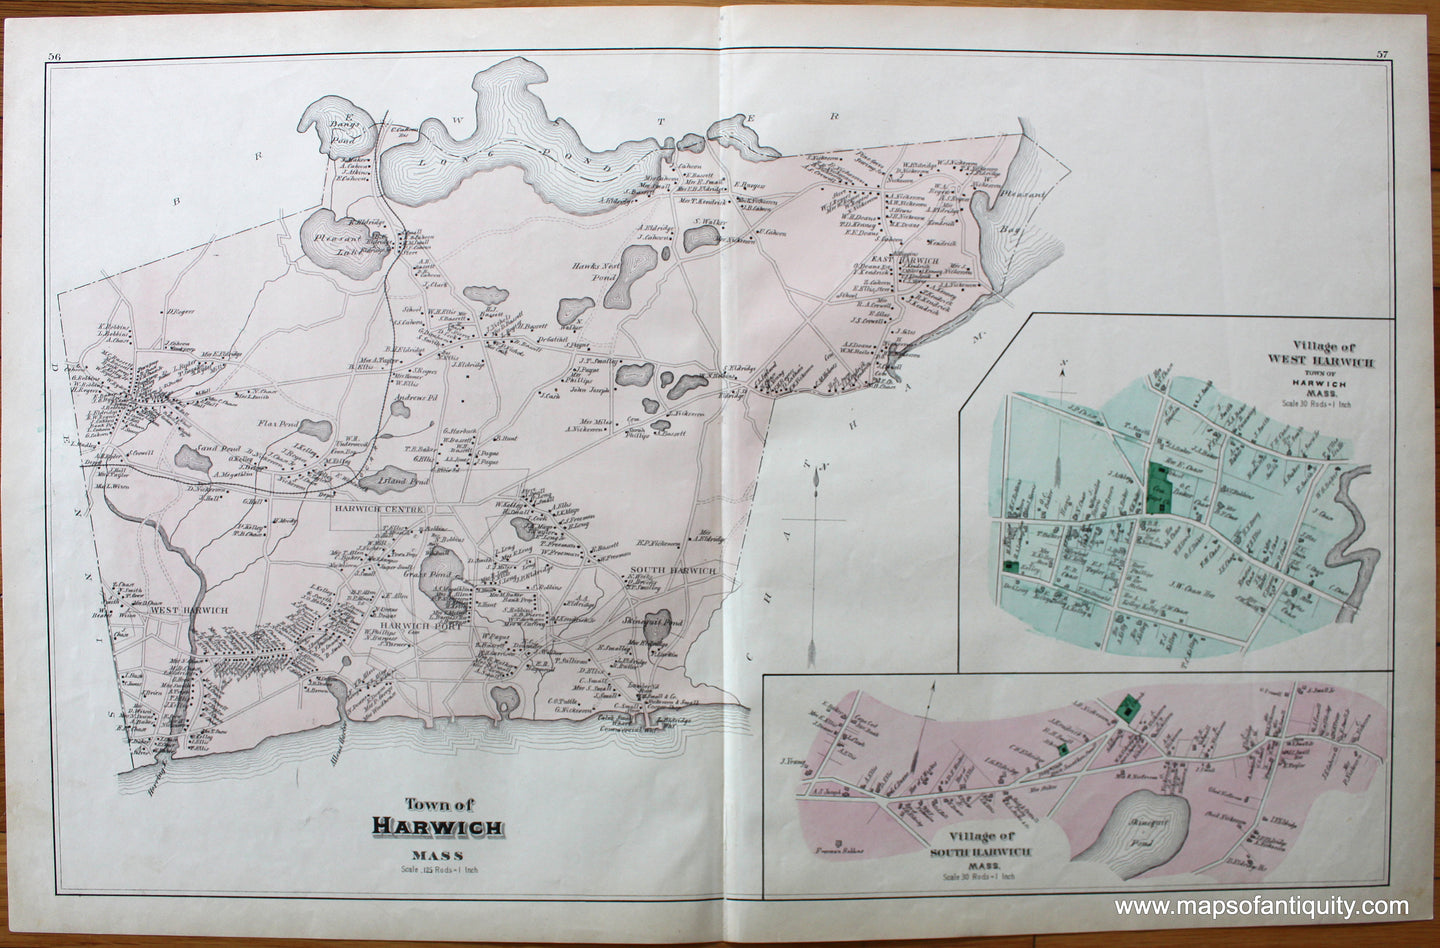 Antique-Map-Town-of-Harwich-Village-of-West-Harwich-Village-of-South-Harwich-pp.-56-57